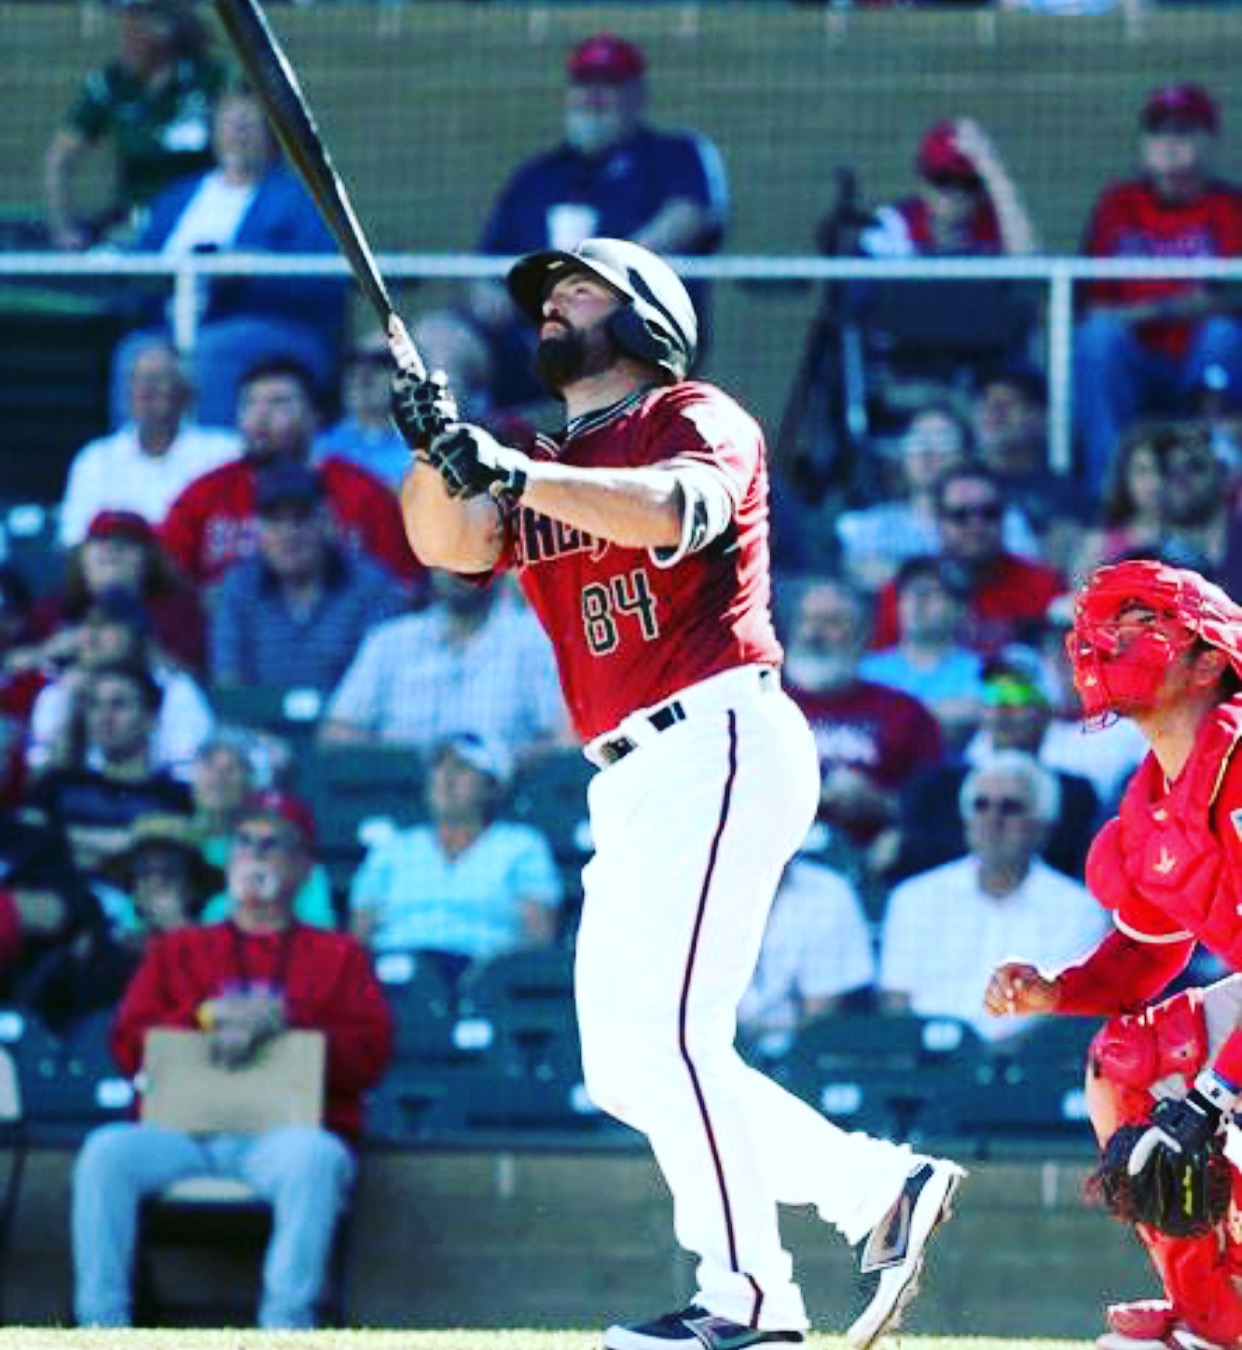 The Chihuahua’s Cody Decker is Back-- And He’s Fixin’ to Stay